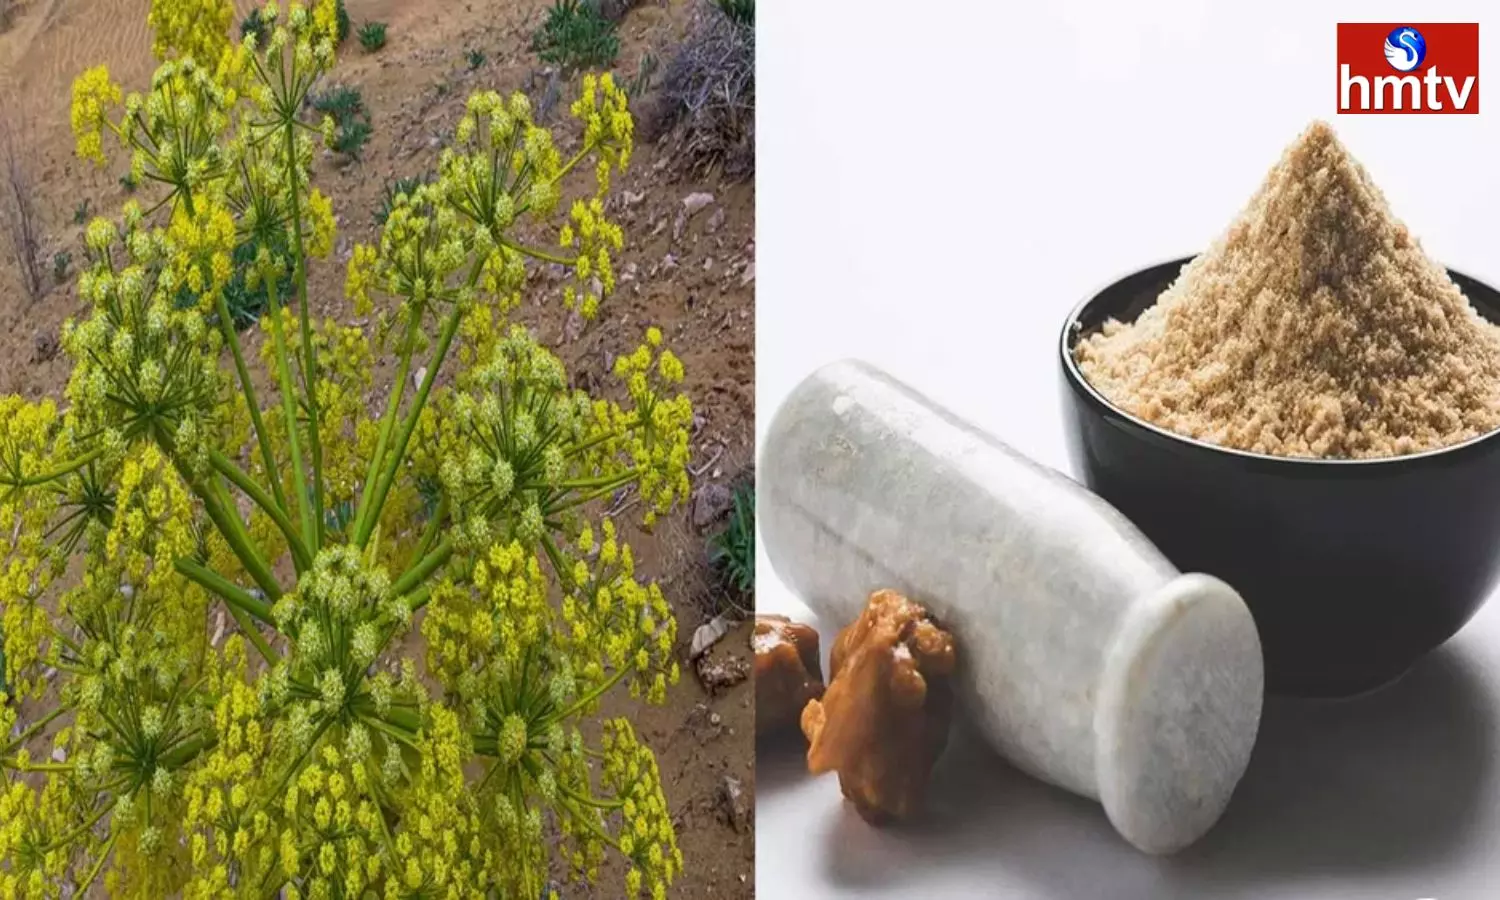 High Profits With Asafoetida Cultivation the Price of 1 kg of Asafoetida is Rs 35000